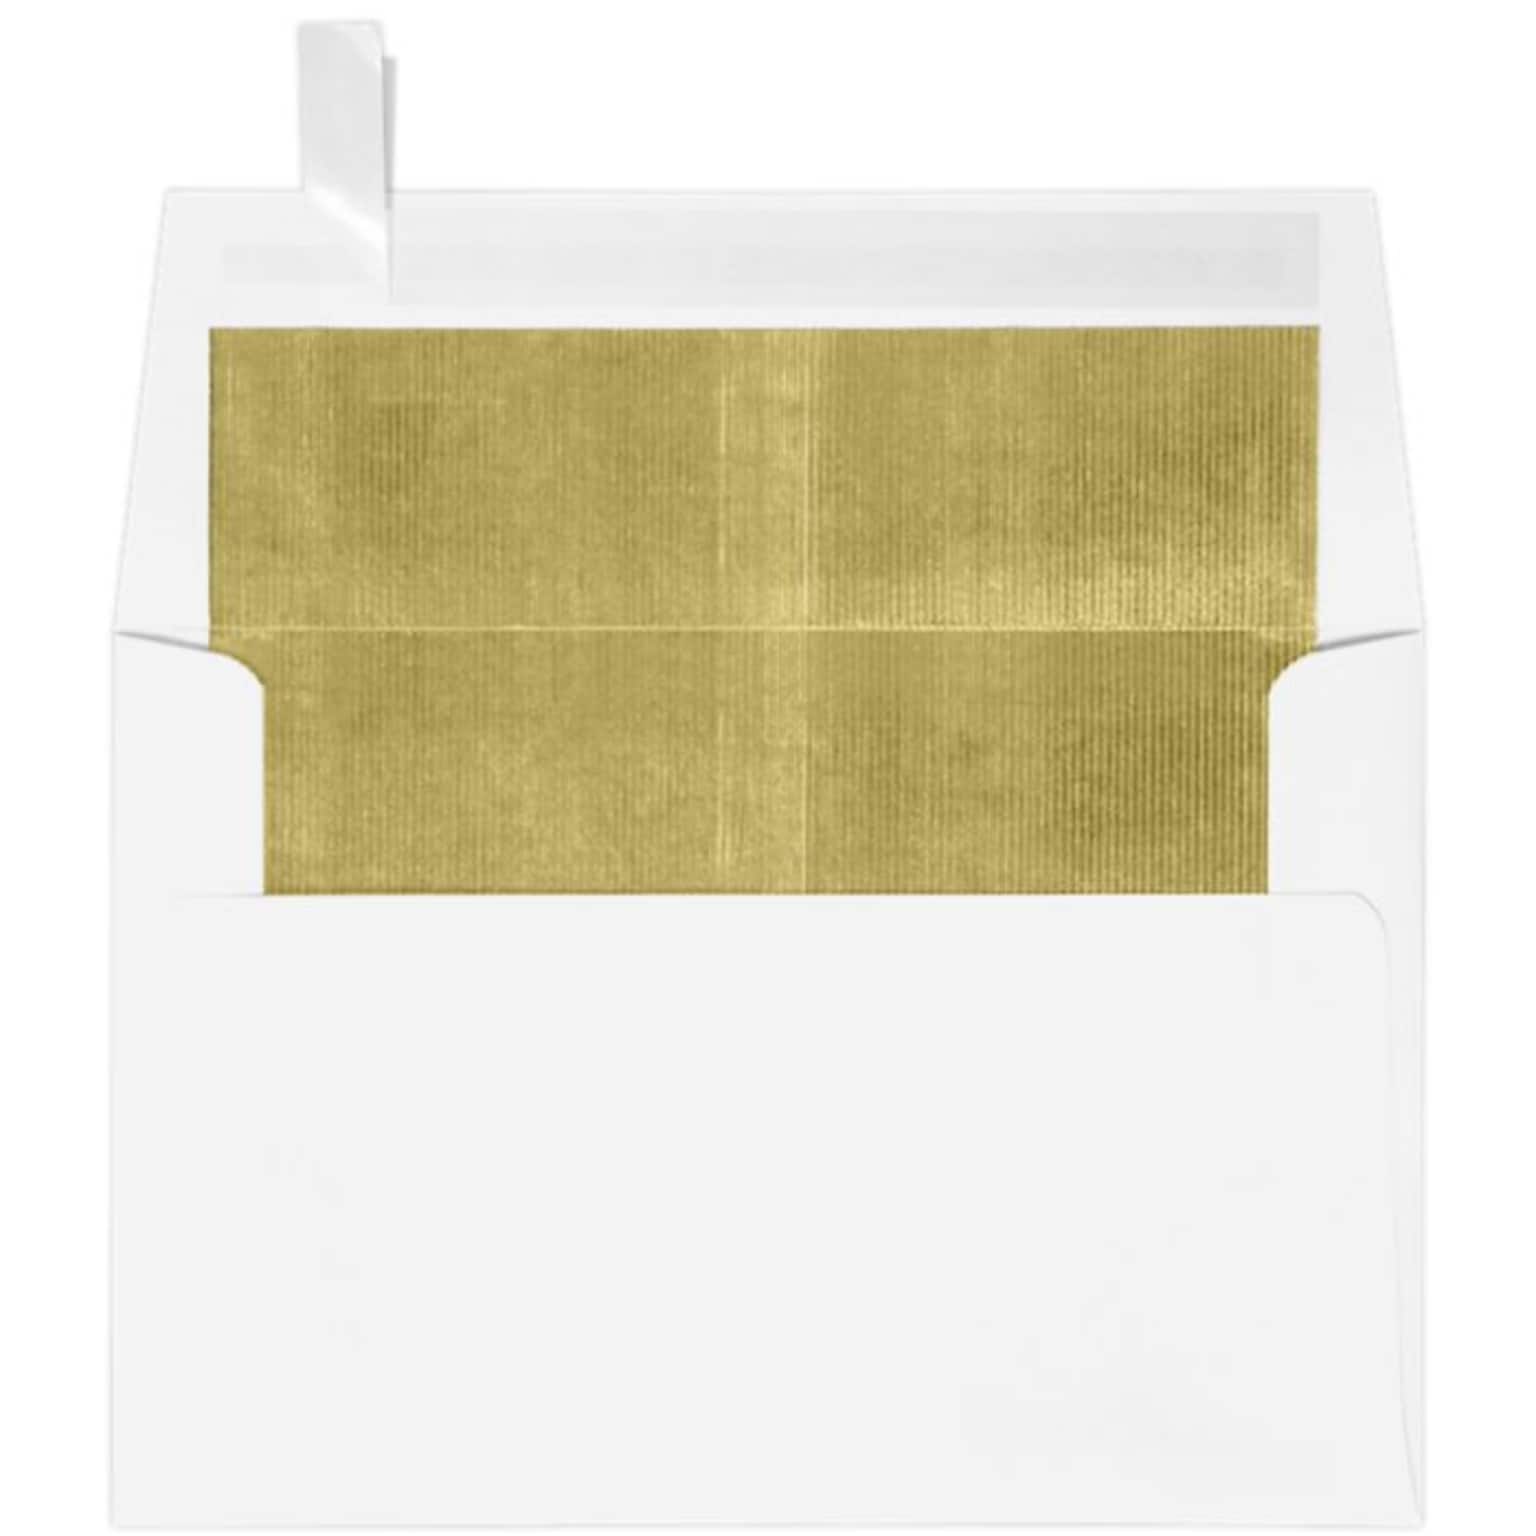 Lux® 4 1/4 x 6 1/4 60lbs. Square Flap Envelopes W/Peel & Press; White/Gold LUX Lining